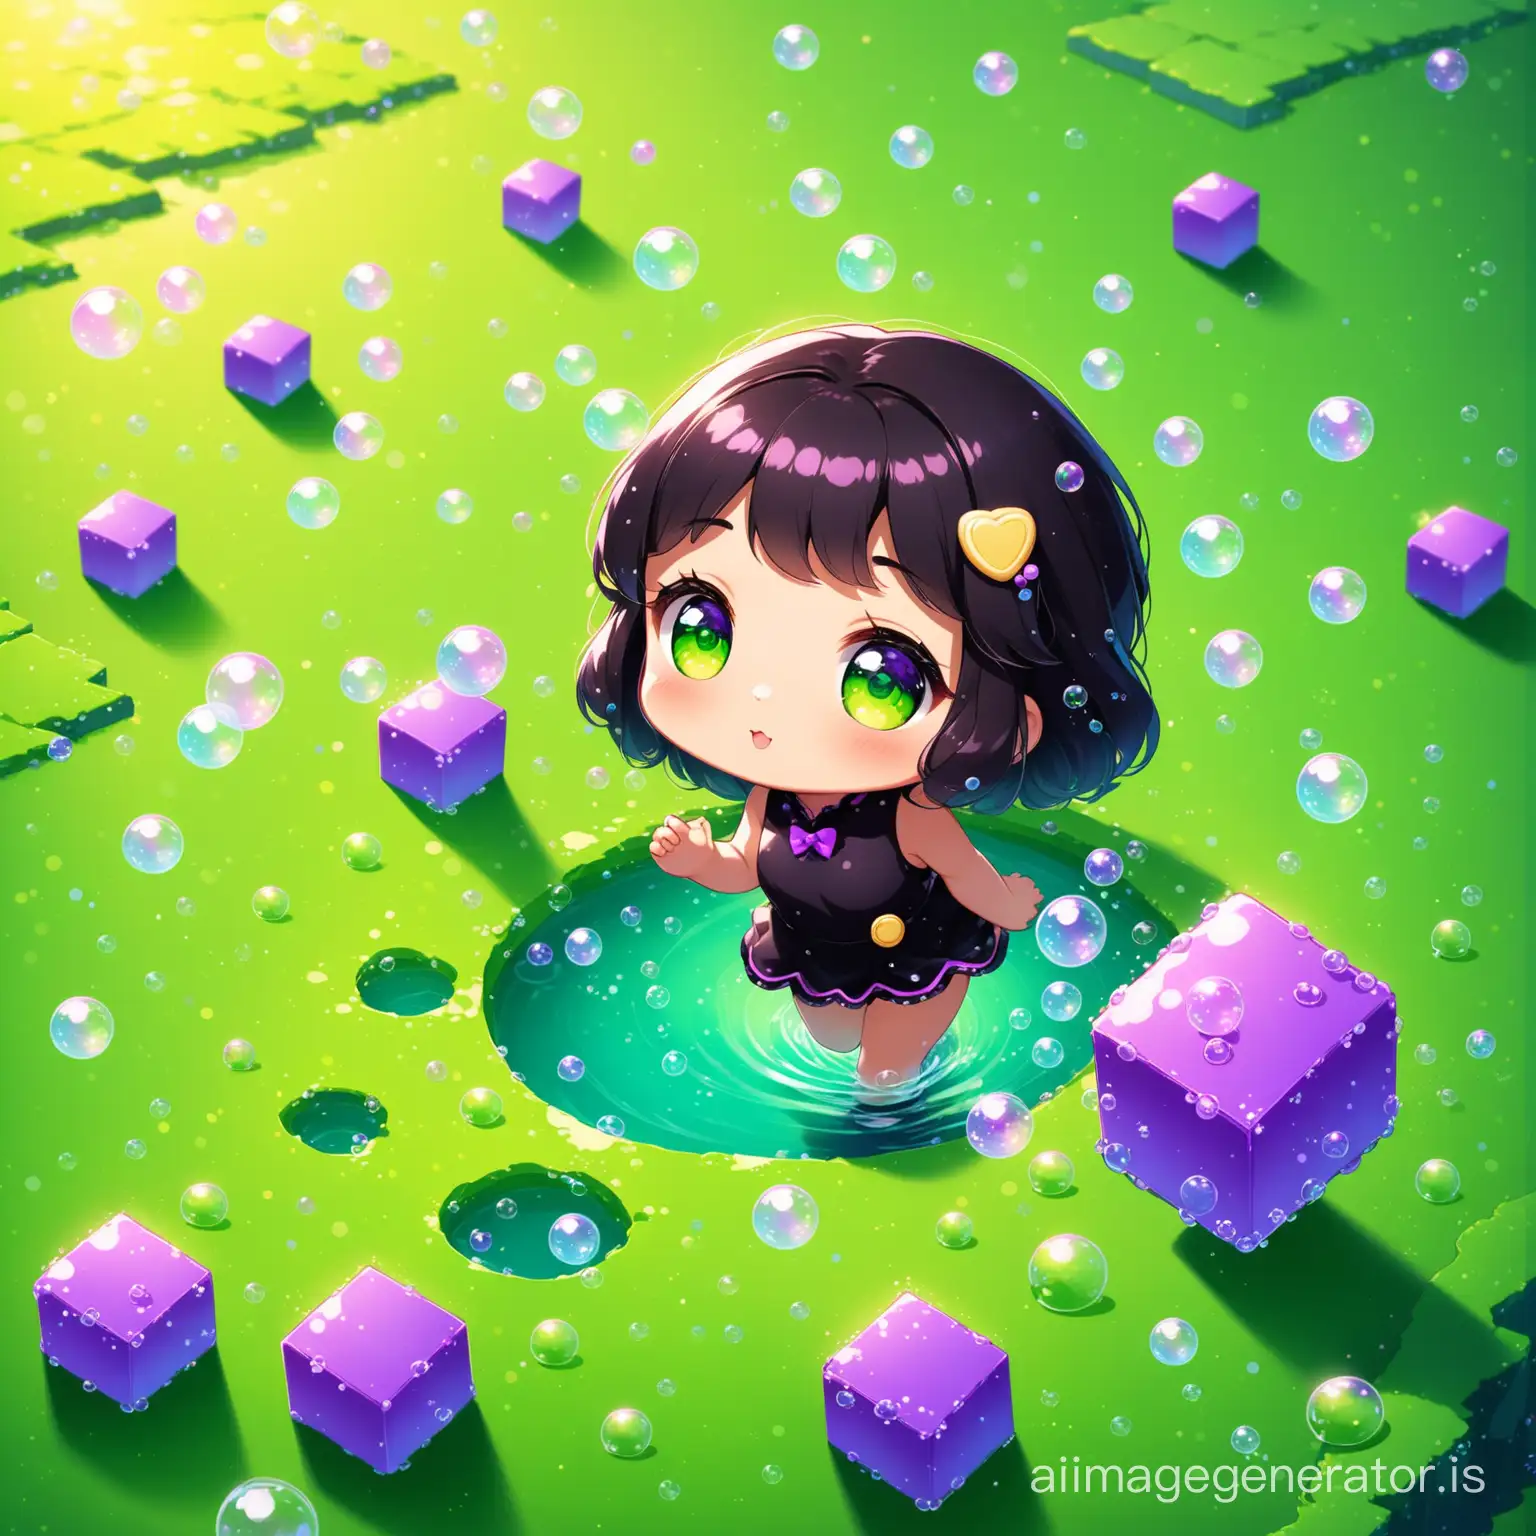 Adorable-Black-Cookie-with-Green-Eyes-Strolling-Through-a-Bubbly-Landscape